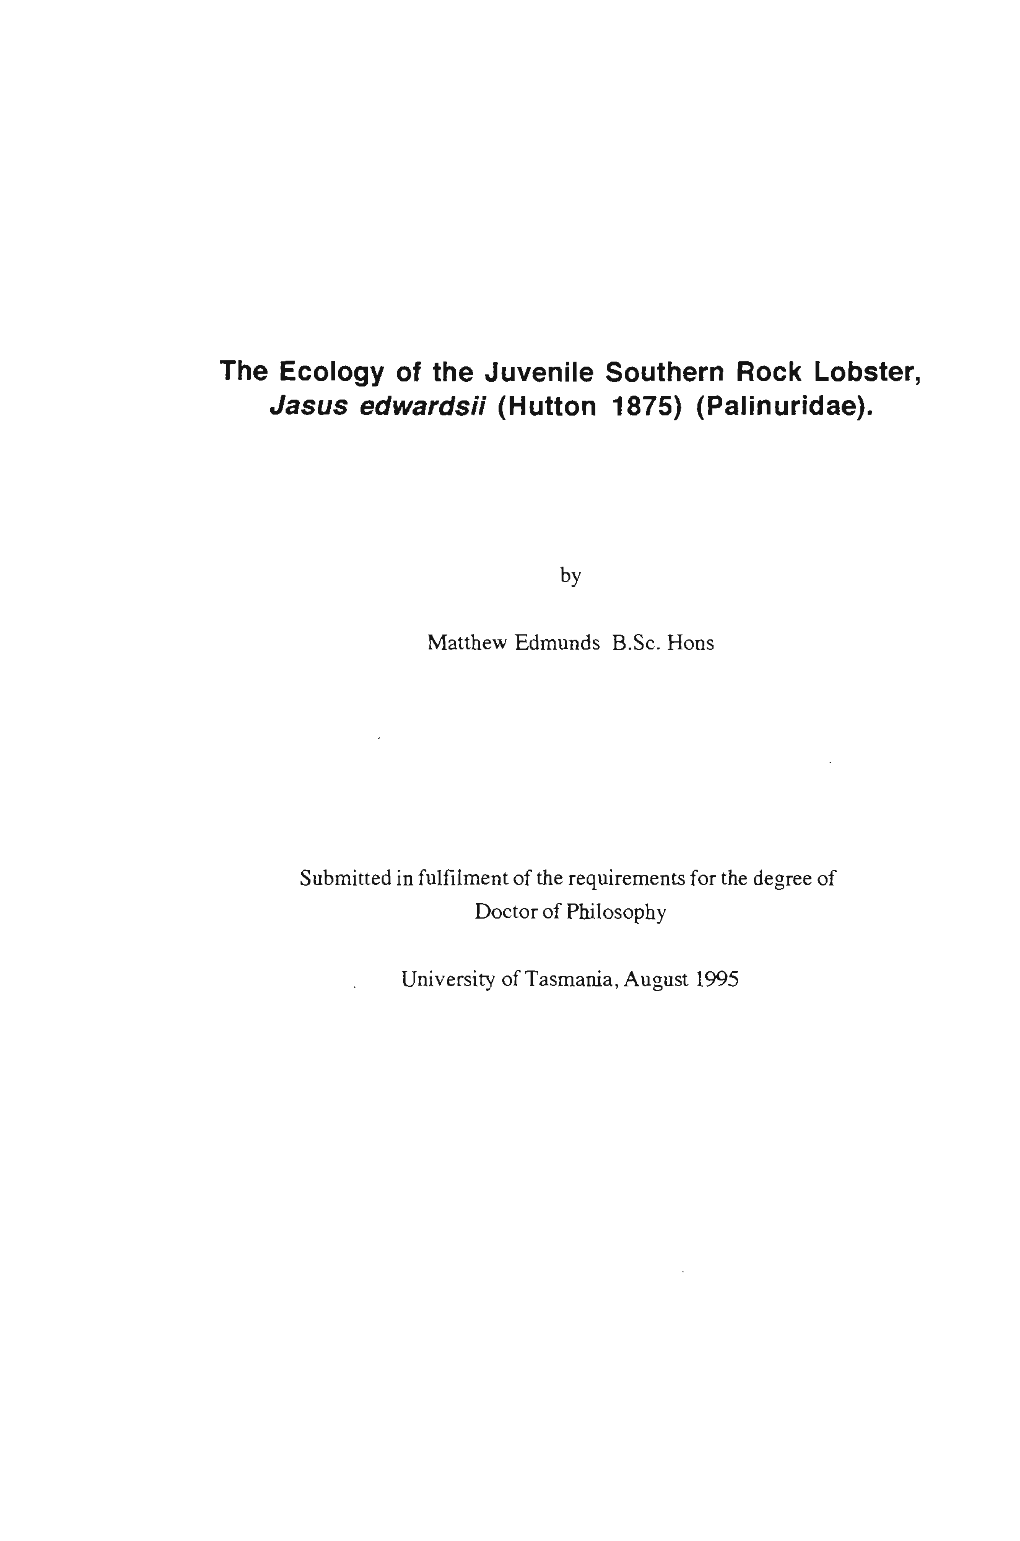 The Ecology of the Juvenile Southern Rock Lobster, Jasus Edwardsii (Hutton 1875) (Palinuridae)